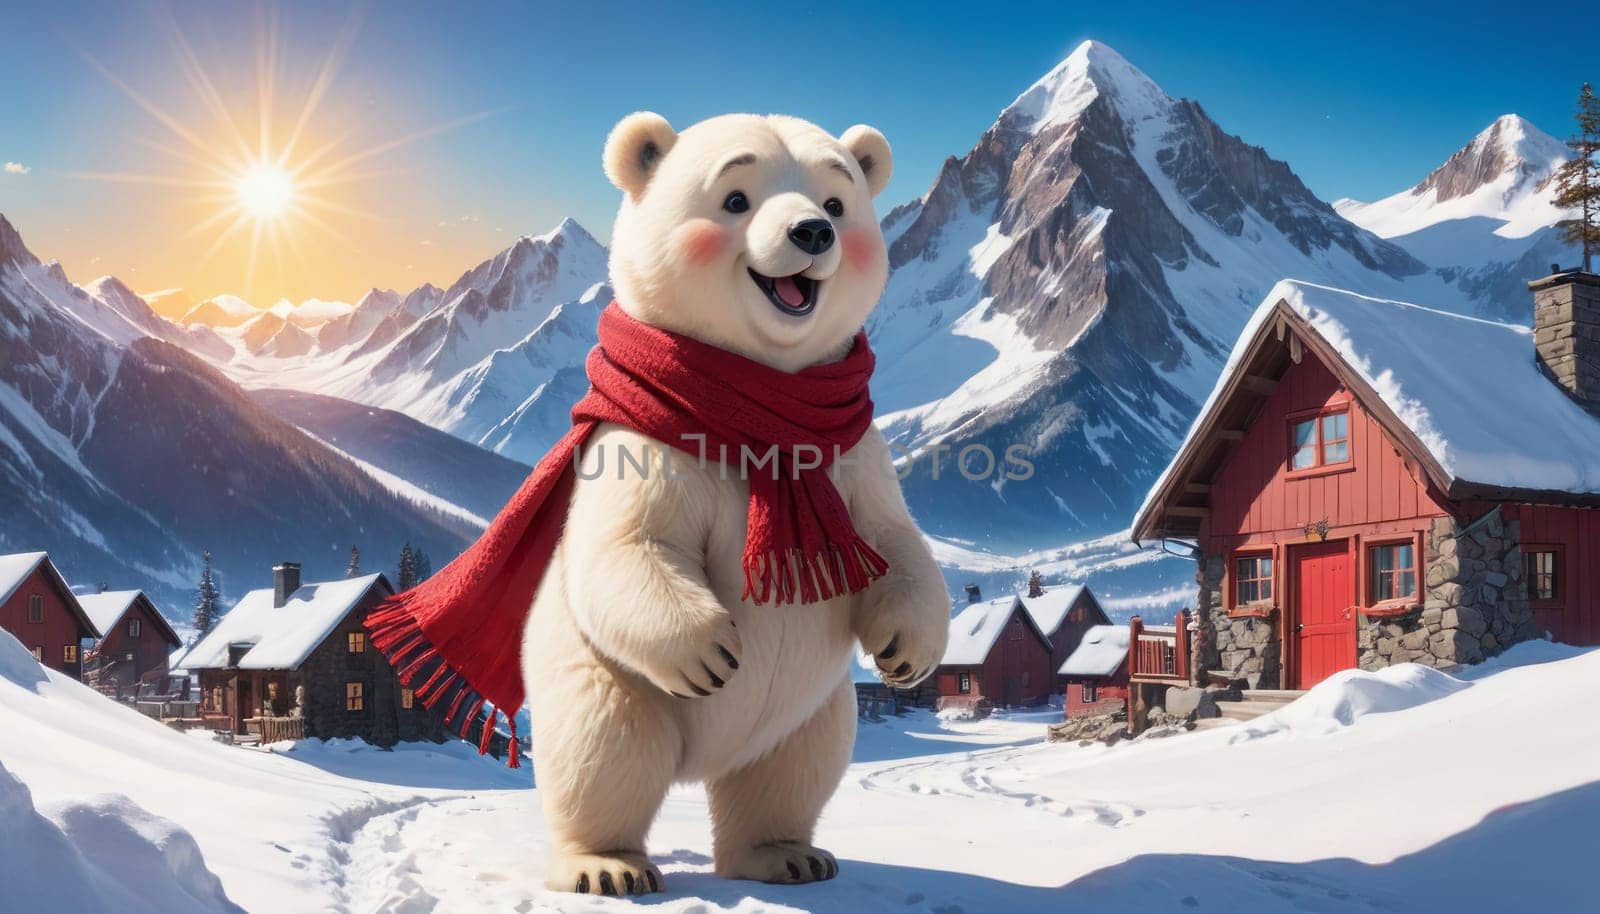 Polar bear with a red scarf smiles in a snowy setting, with red cabins and mountains bathed in sunset light